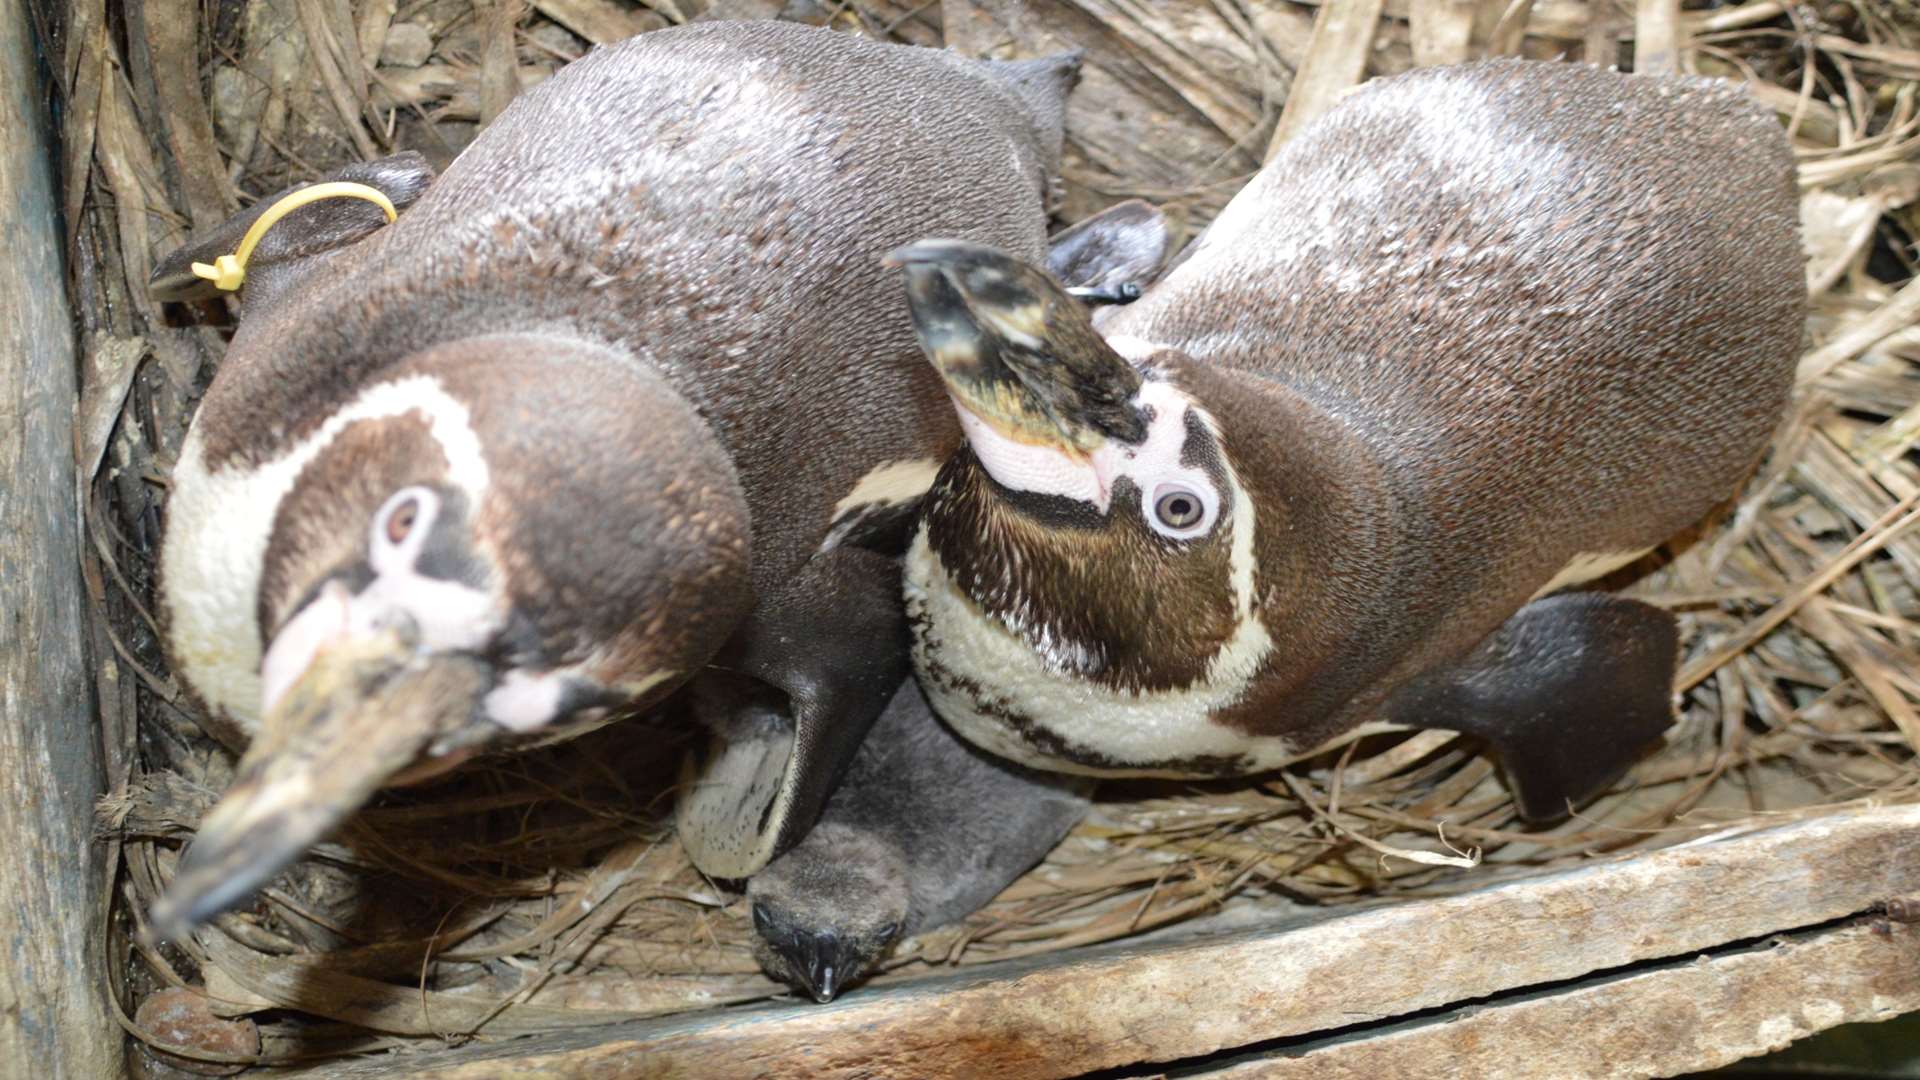 The penguins with their small chick